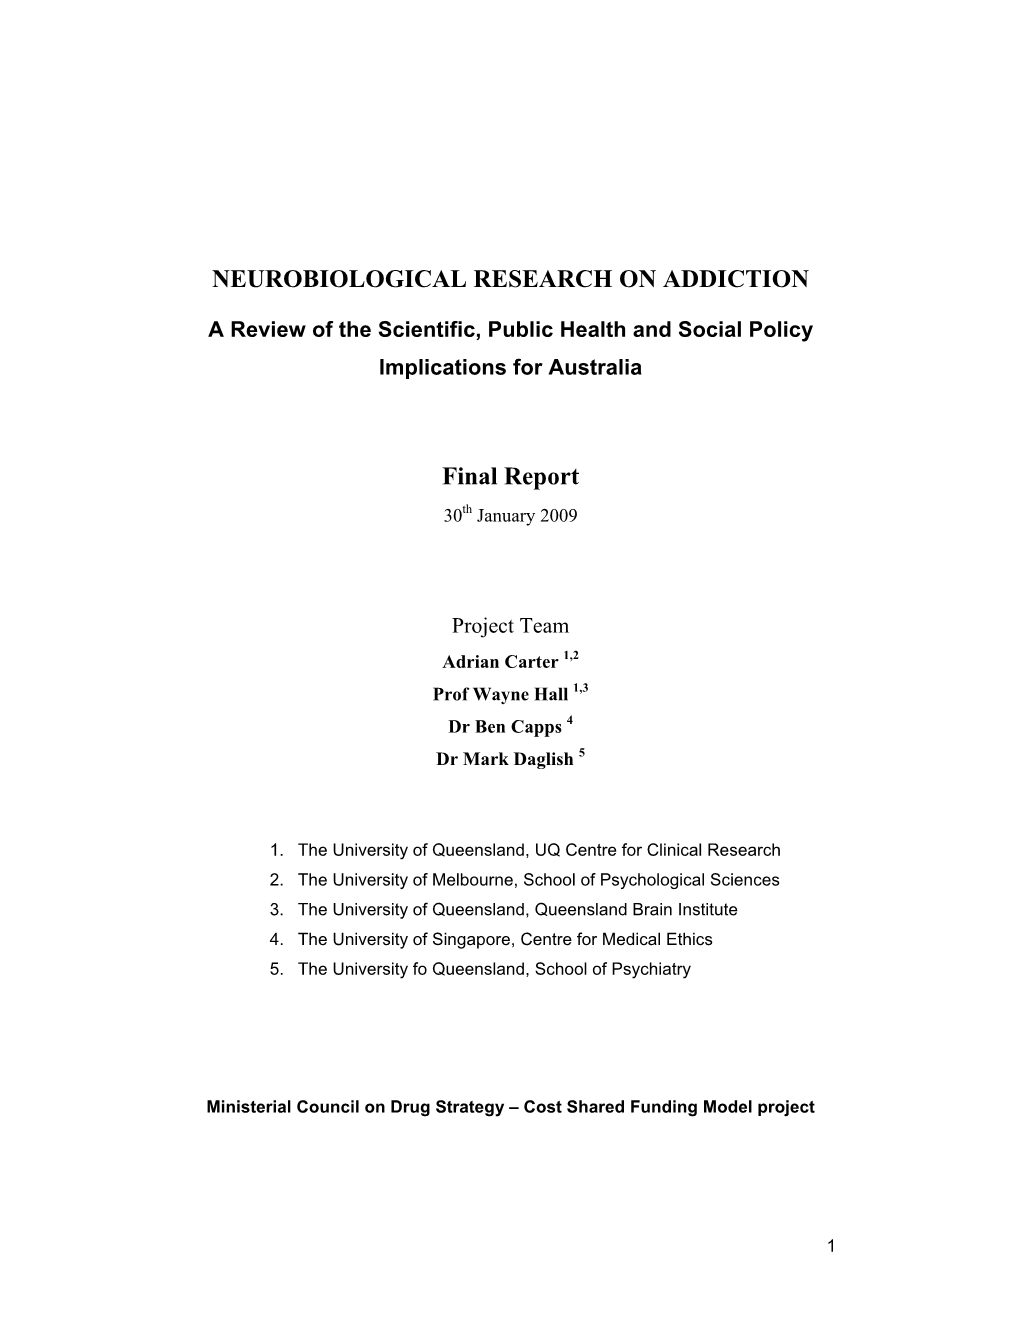 NEUROBIOLOGICAL RESEARCH on ADDICTION Final Report